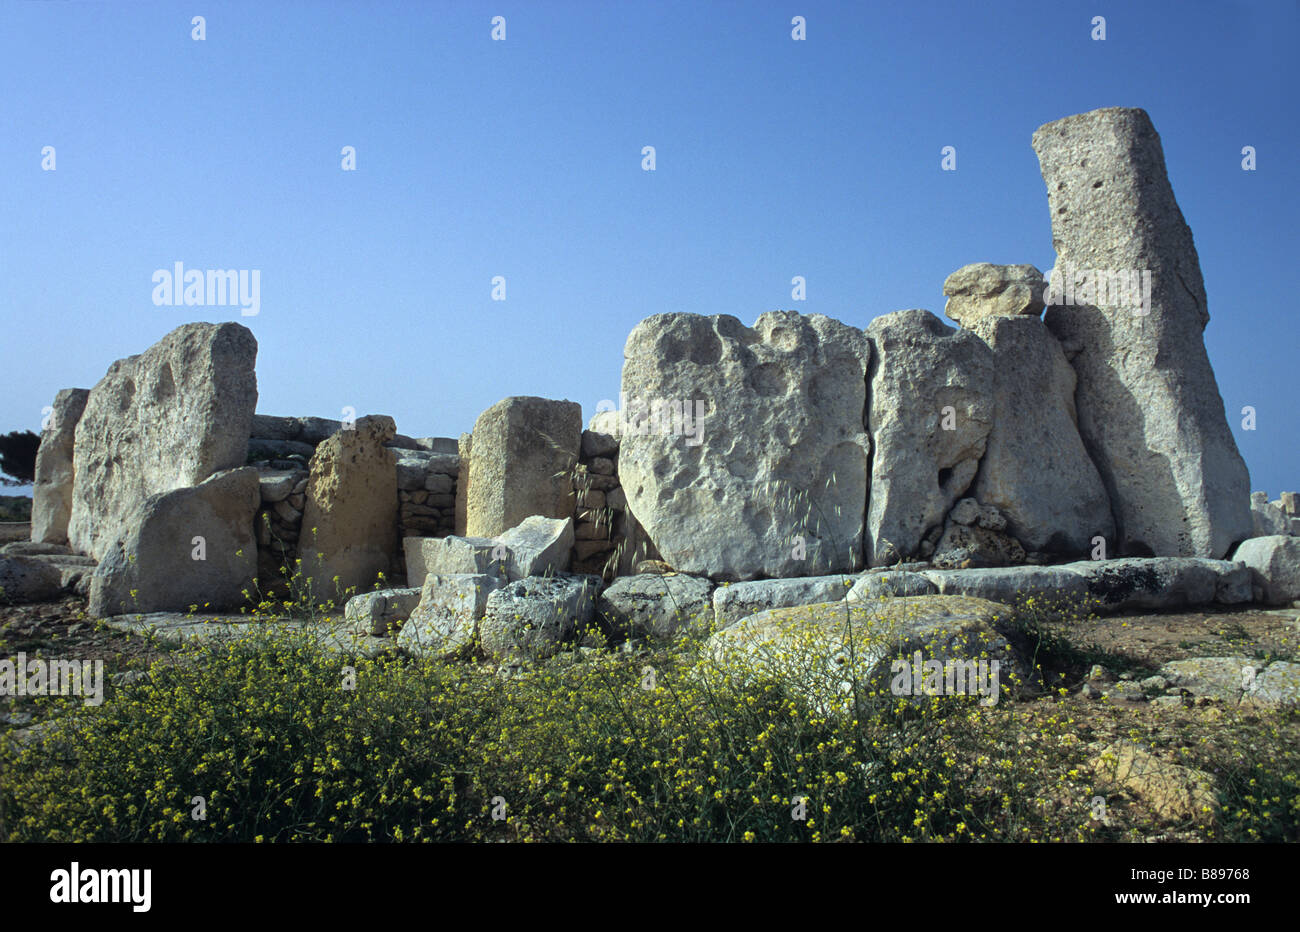 Prehistoric or Megalithic Hagar Qim Temple Standing Stones, Temples for a Fertility Worshipping Religion or Cult, Malta Stock Photo